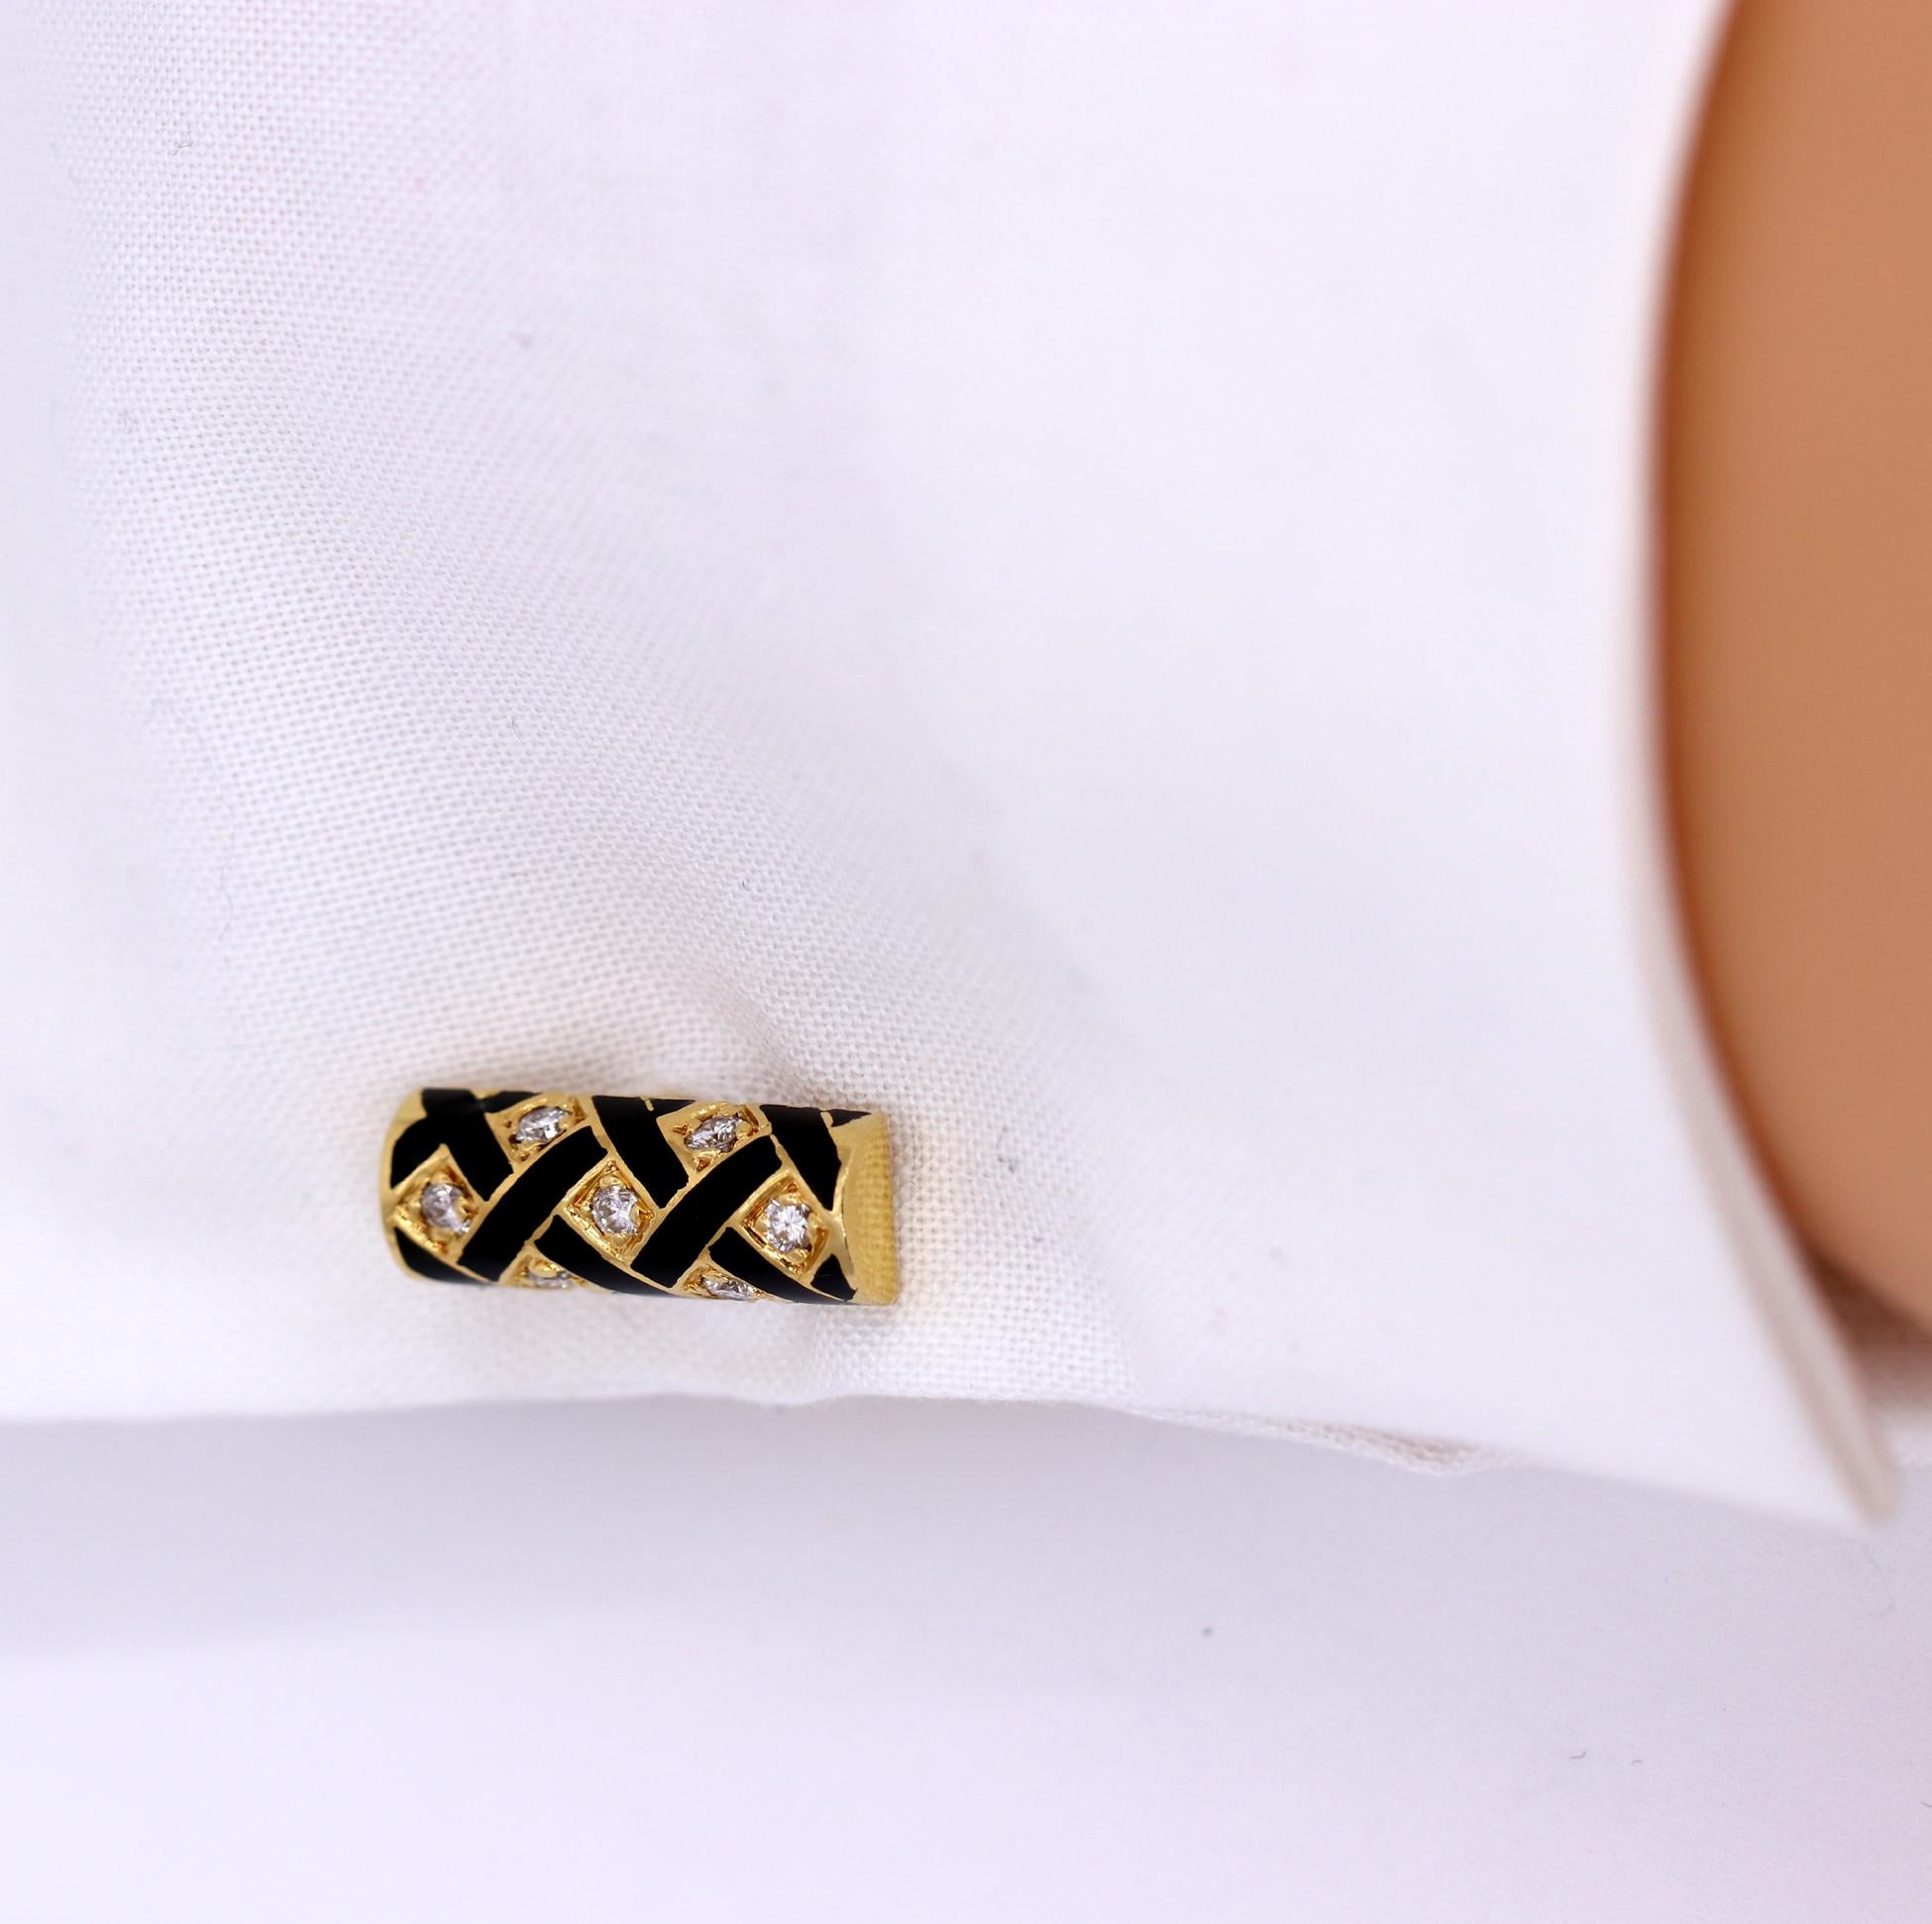 A gentleman's dress set, complete with a pair of cufflinks, and four buttons for a tuxedo shirt. The front of each cufflink has a black enamel lattice design, set with 7 round brilliant cut diamonds. The back of each cufflink is hinged for ease of